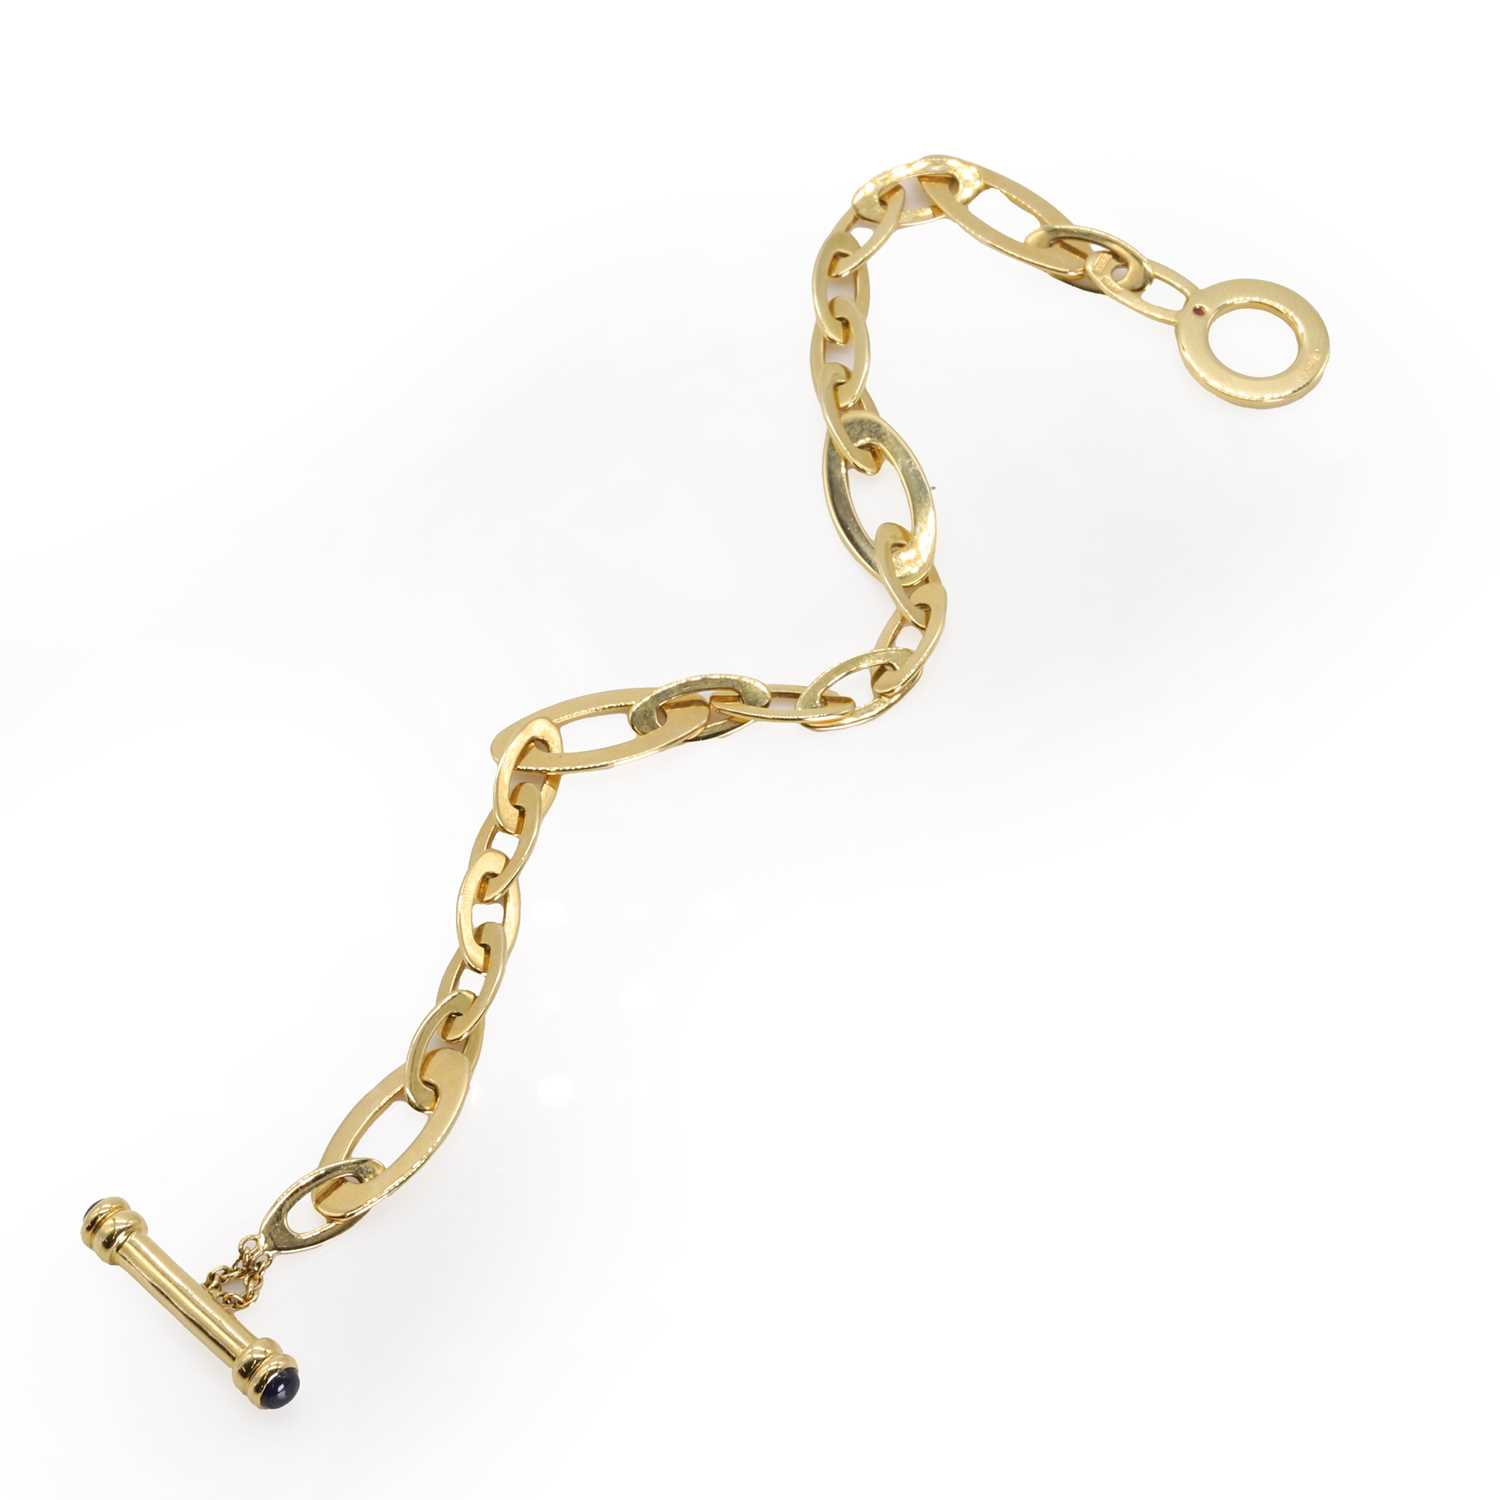 An 18ct gold 'Chic and Shine' link bracelet, by Roberto Coin, - Image 3 of 3